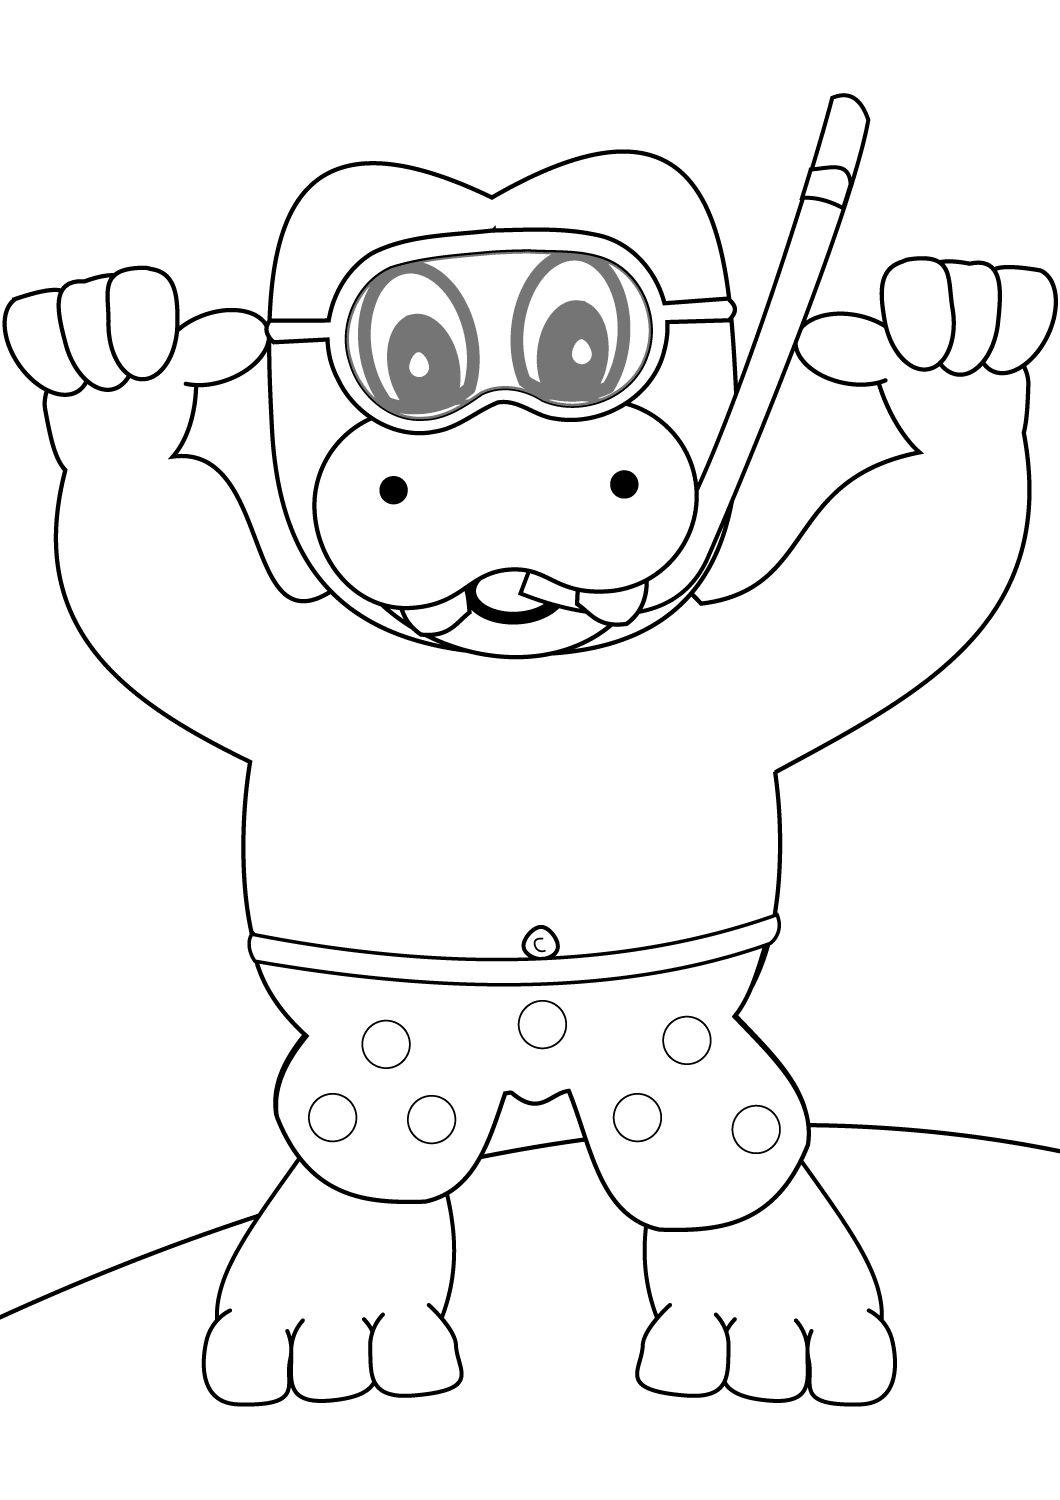 Snorkeling Hippo Coloring Page